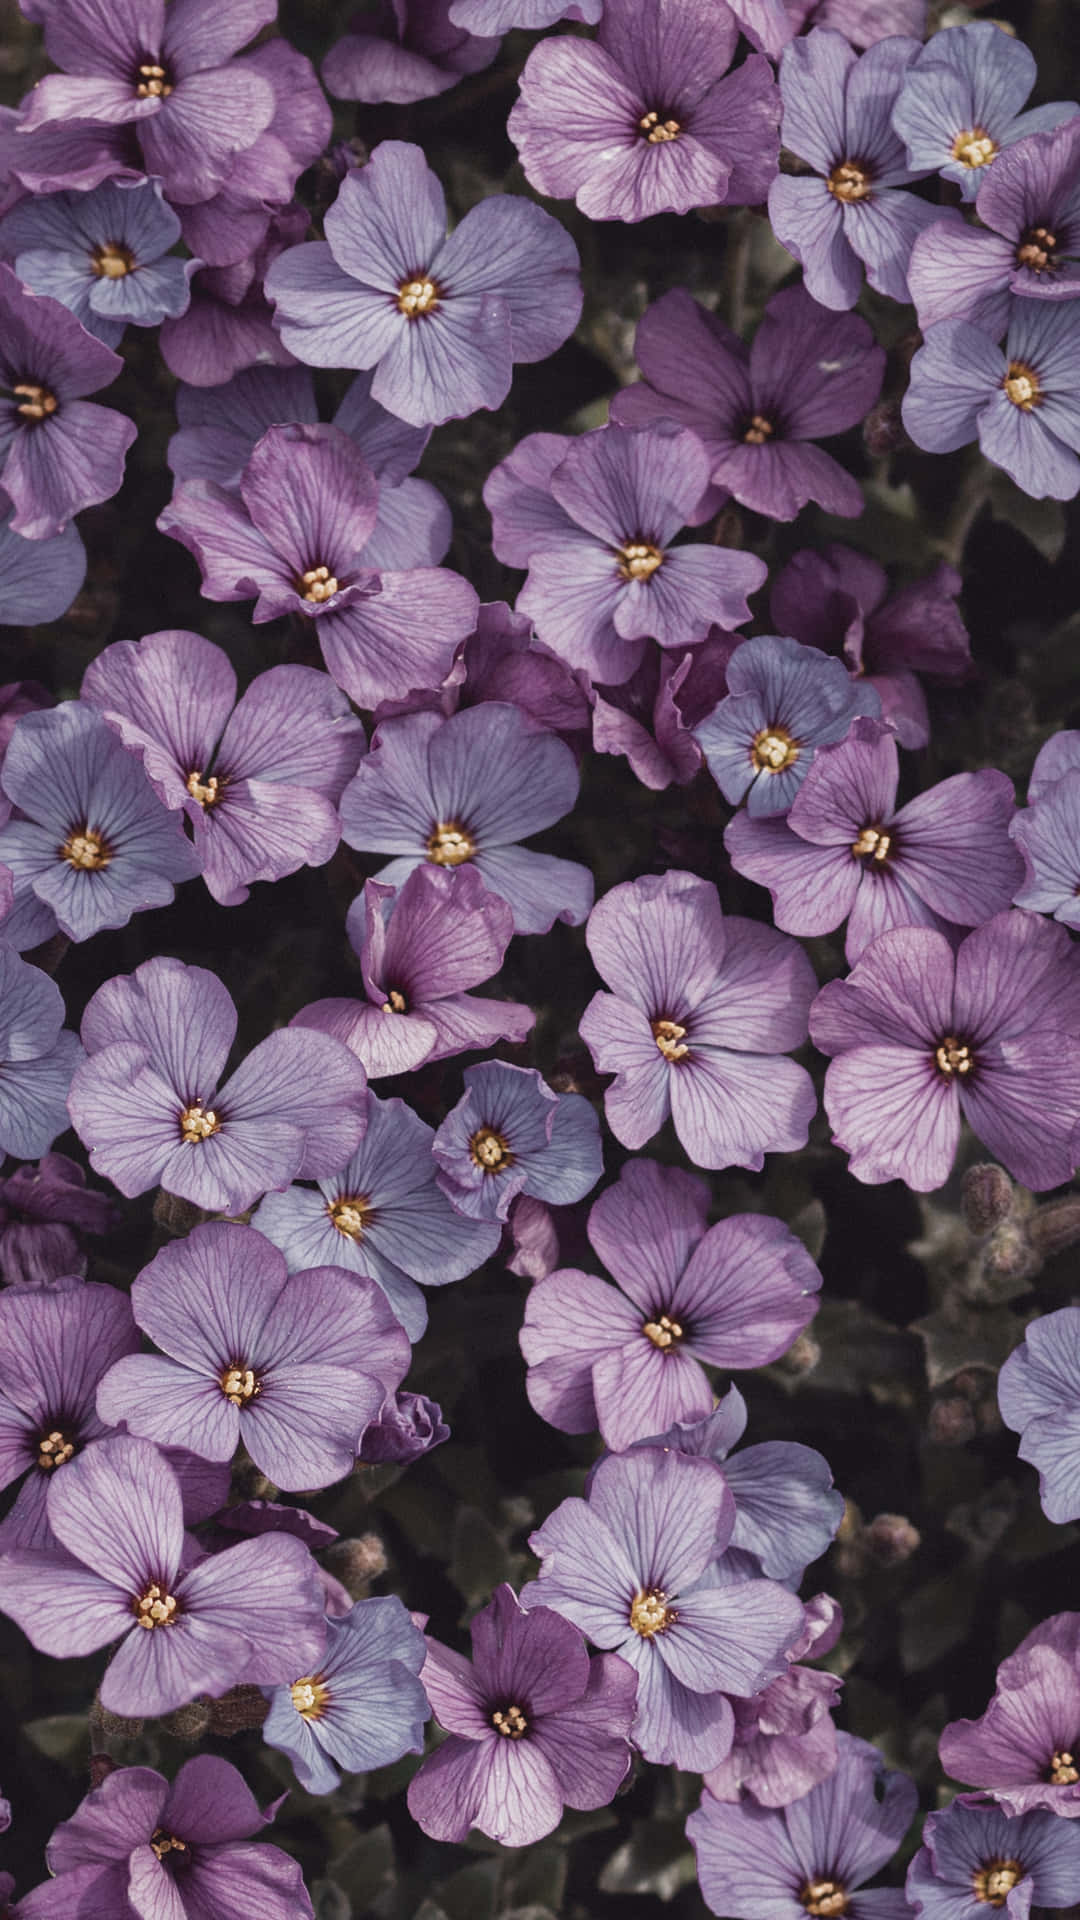 Mesmerizing Shades Of Lavender In Bloom